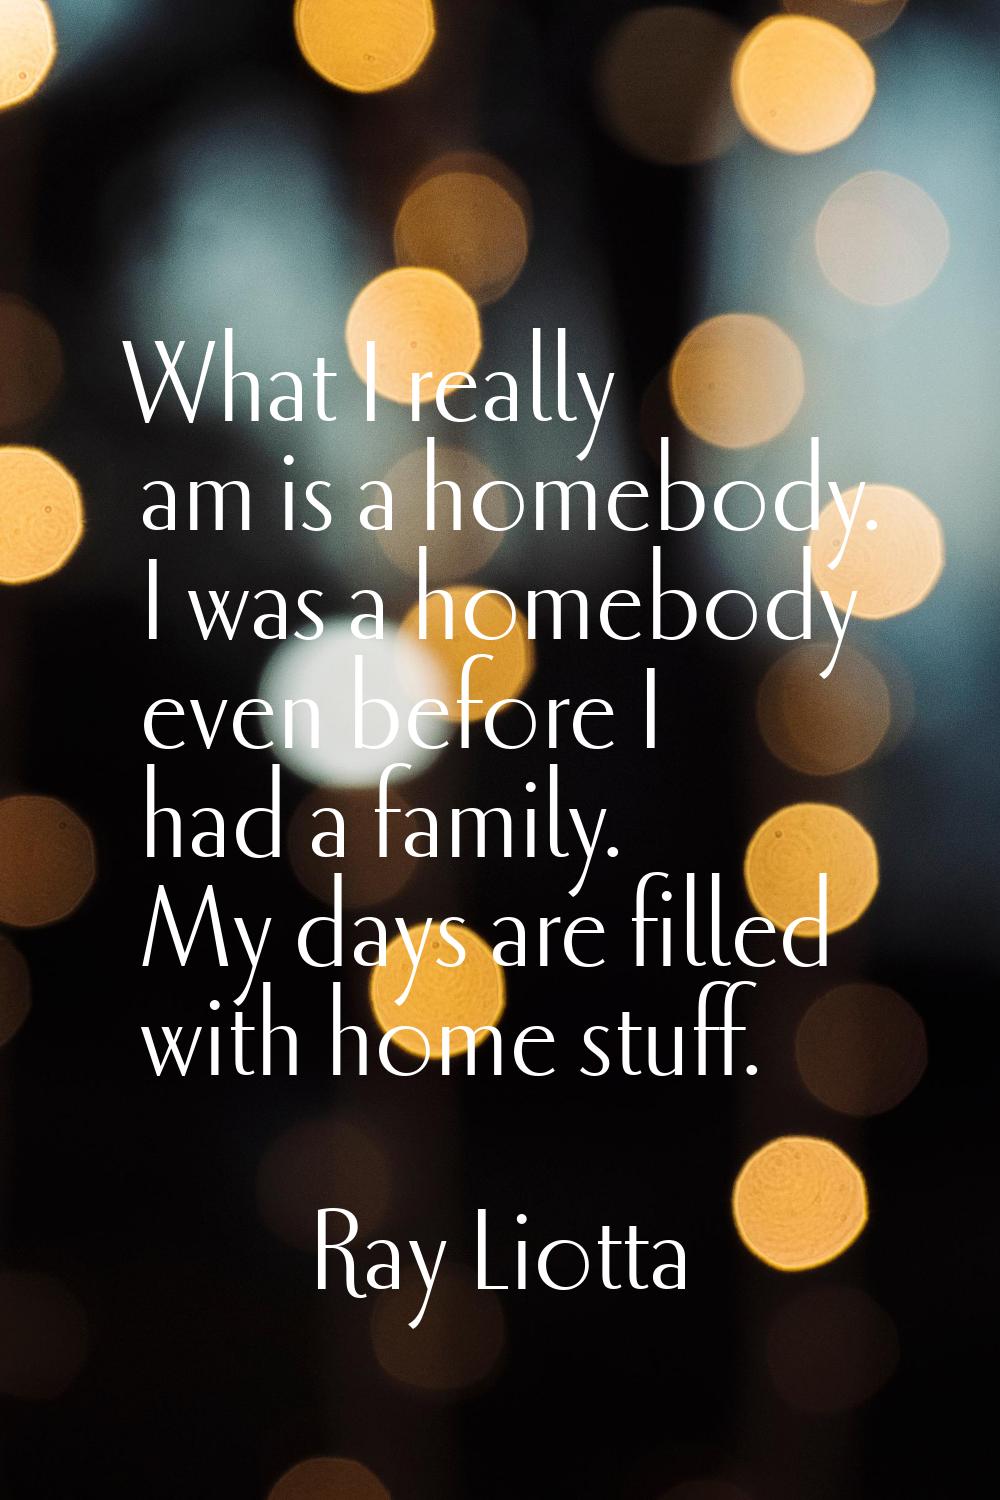 What I really am is a homebody. I was a homebody even before I had a family. My days are filled wit